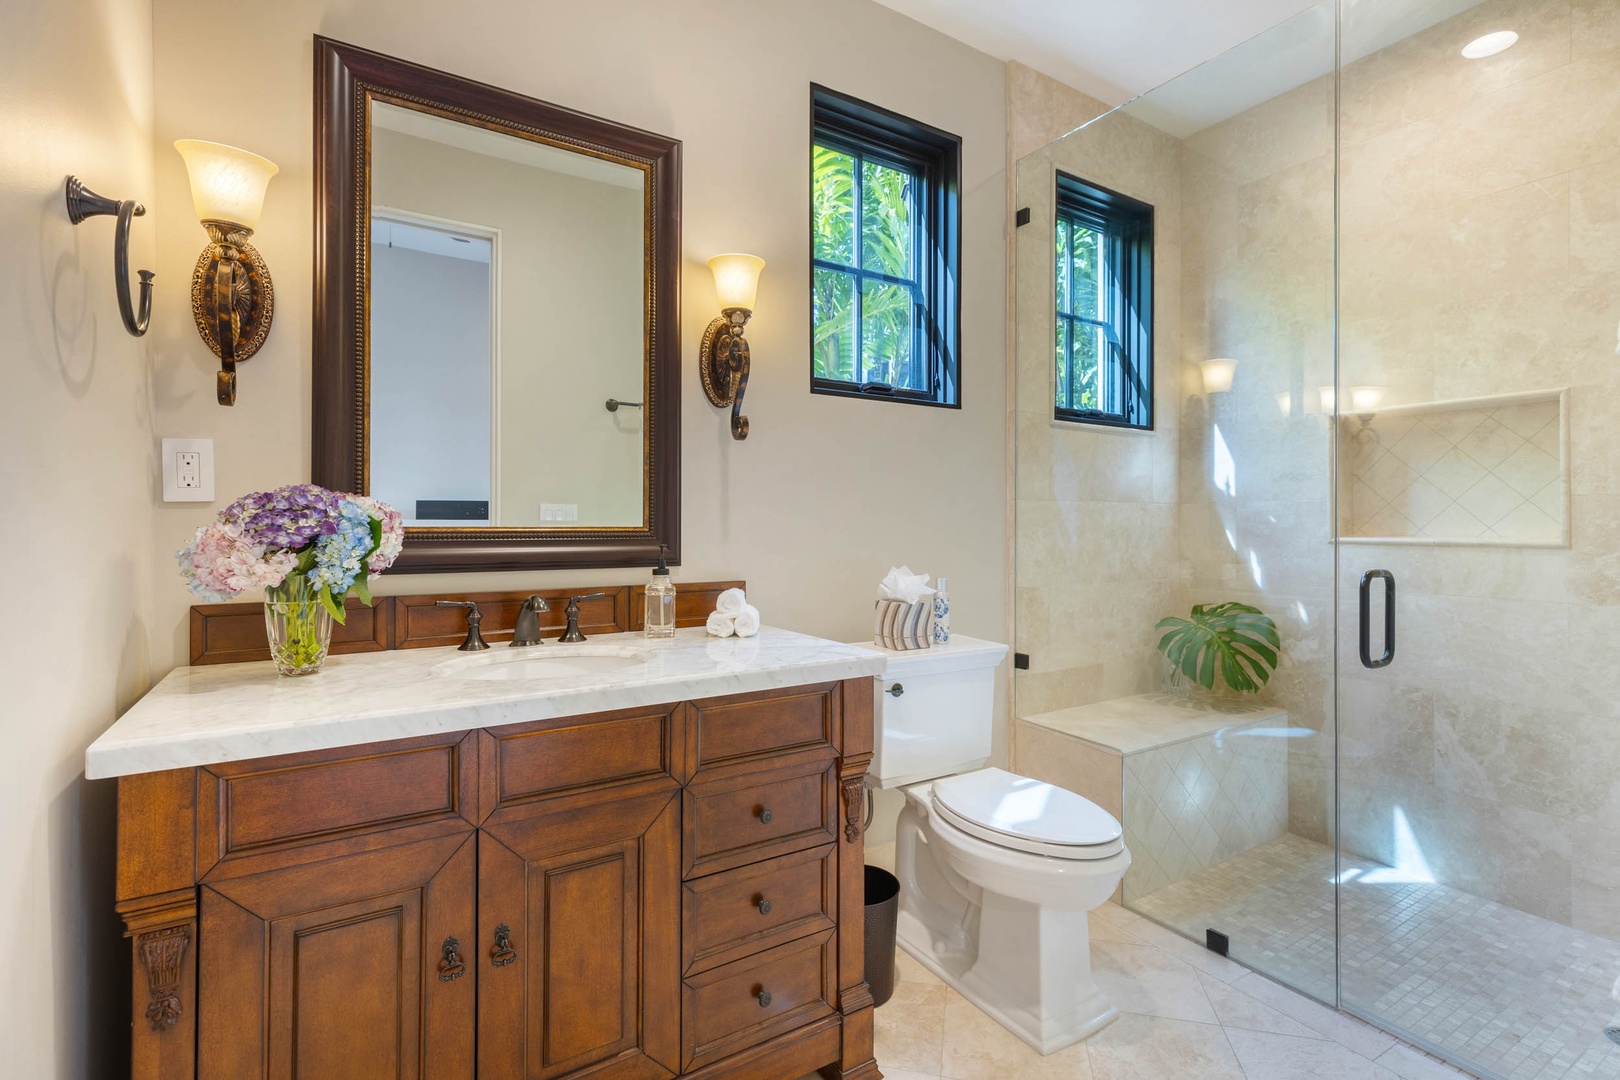 Honolulu Vacation Rentals, The Kahala Mansion - Full bath with a walk-in shower in a glass enclosure.